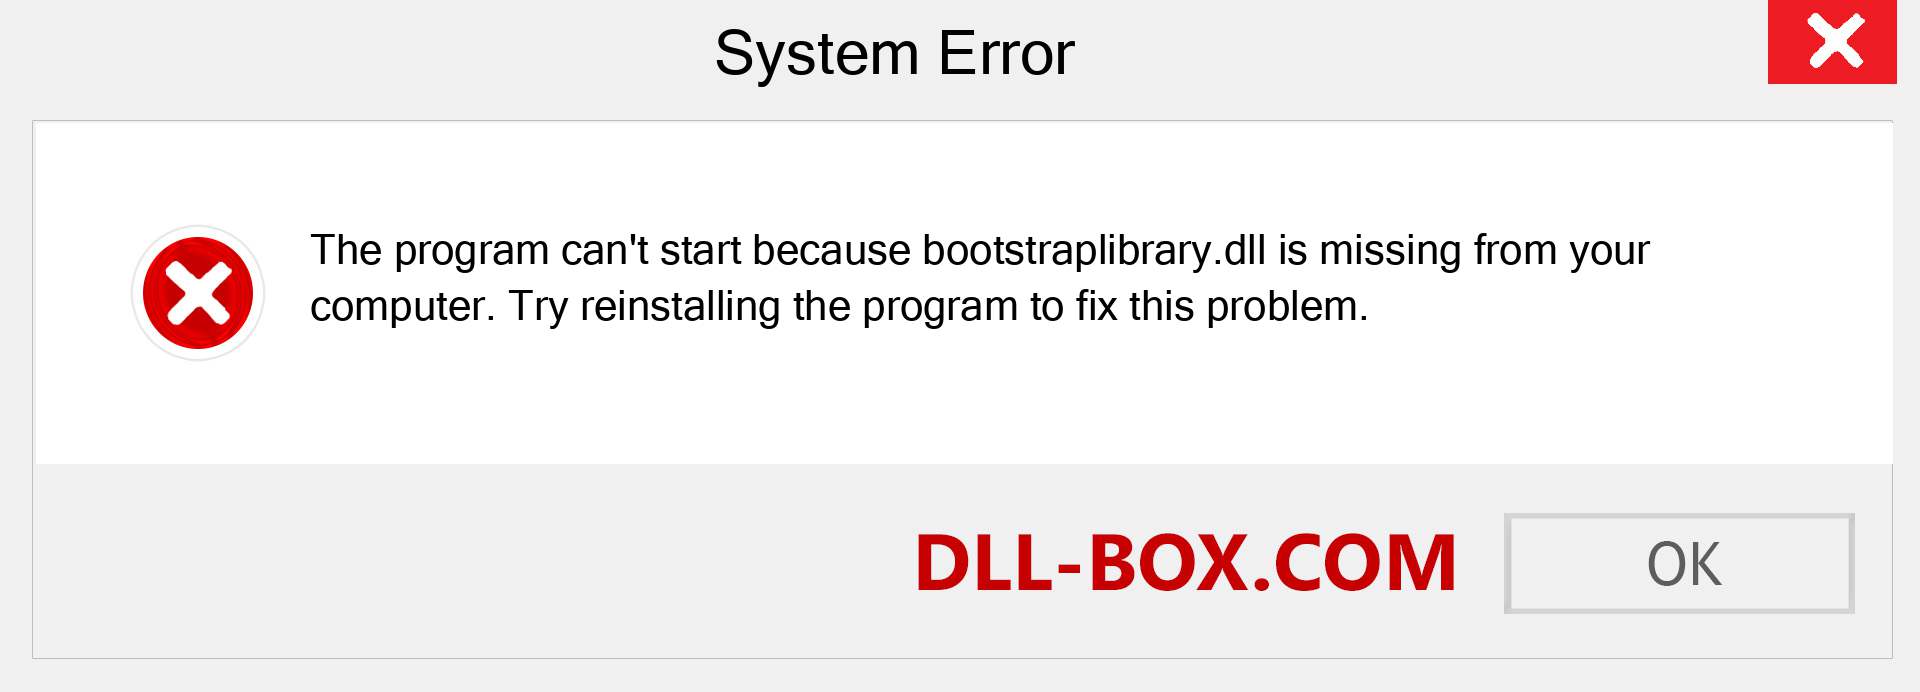  bootstraplibrary.dll file is missing?. Download for Windows 7, 8, 10 - Fix  bootstraplibrary dll Missing Error on Windows, photos, images